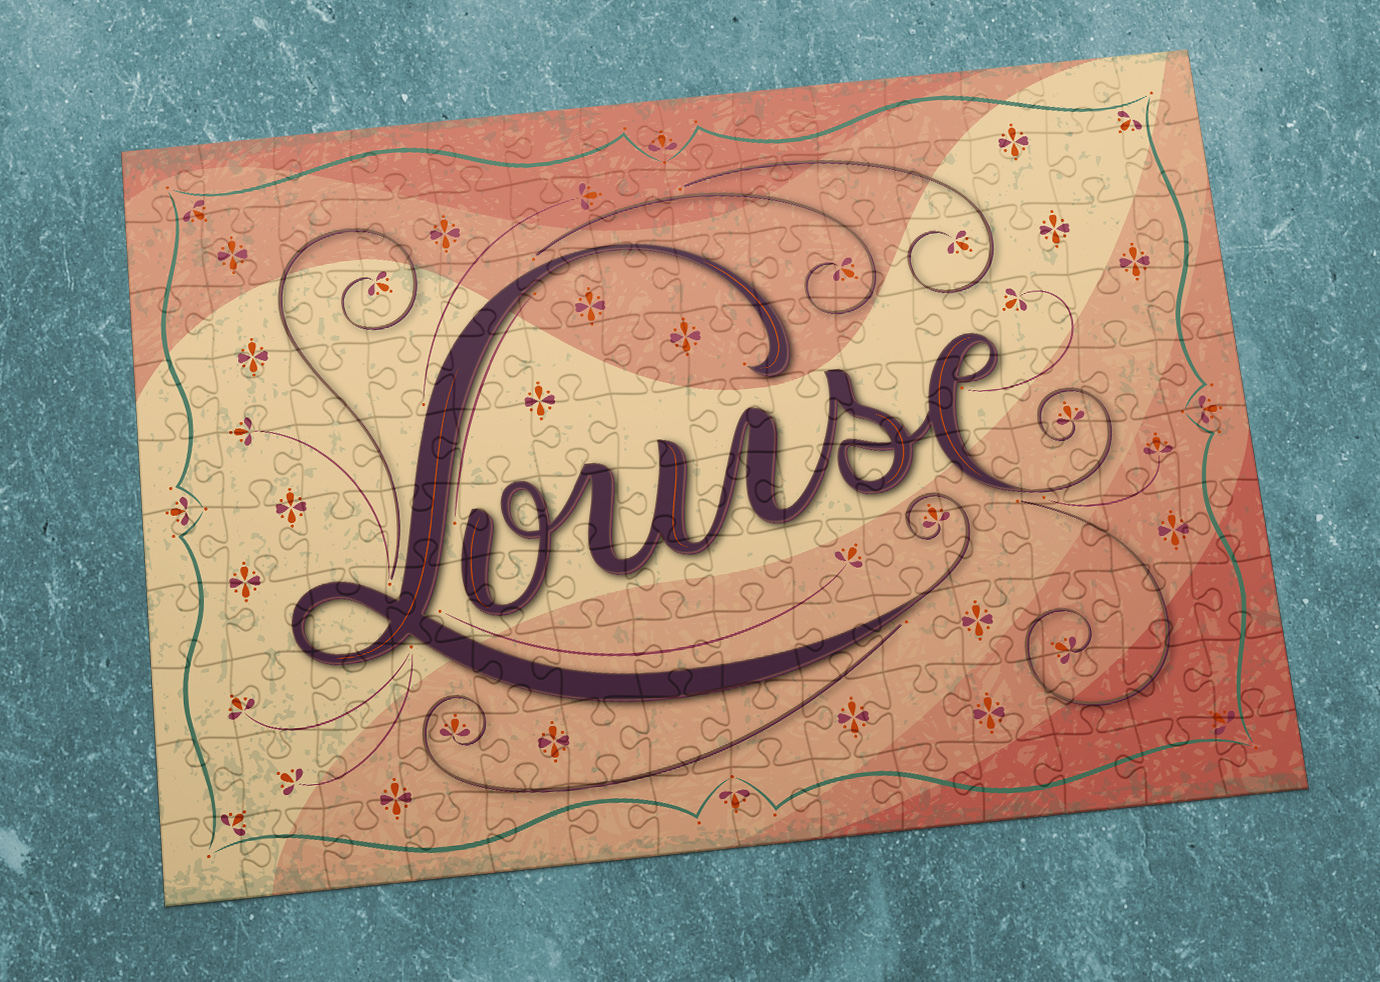 Lettering piece "Louise" on puzzle